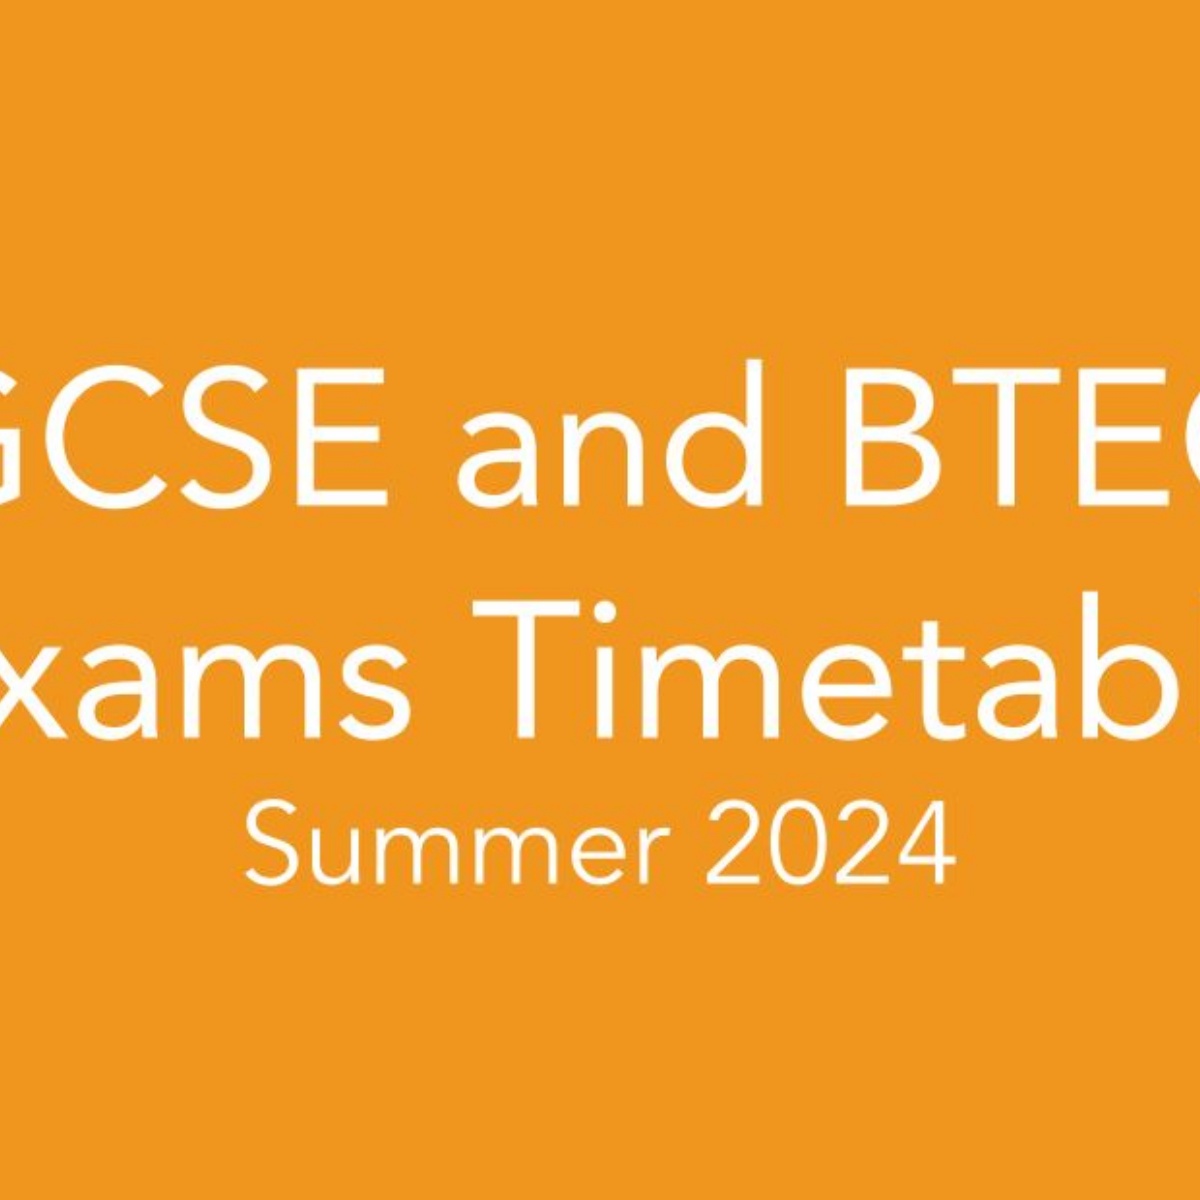 Coop Academy North Manchester GCSE and BTEC Exams Timetable Summer 2024